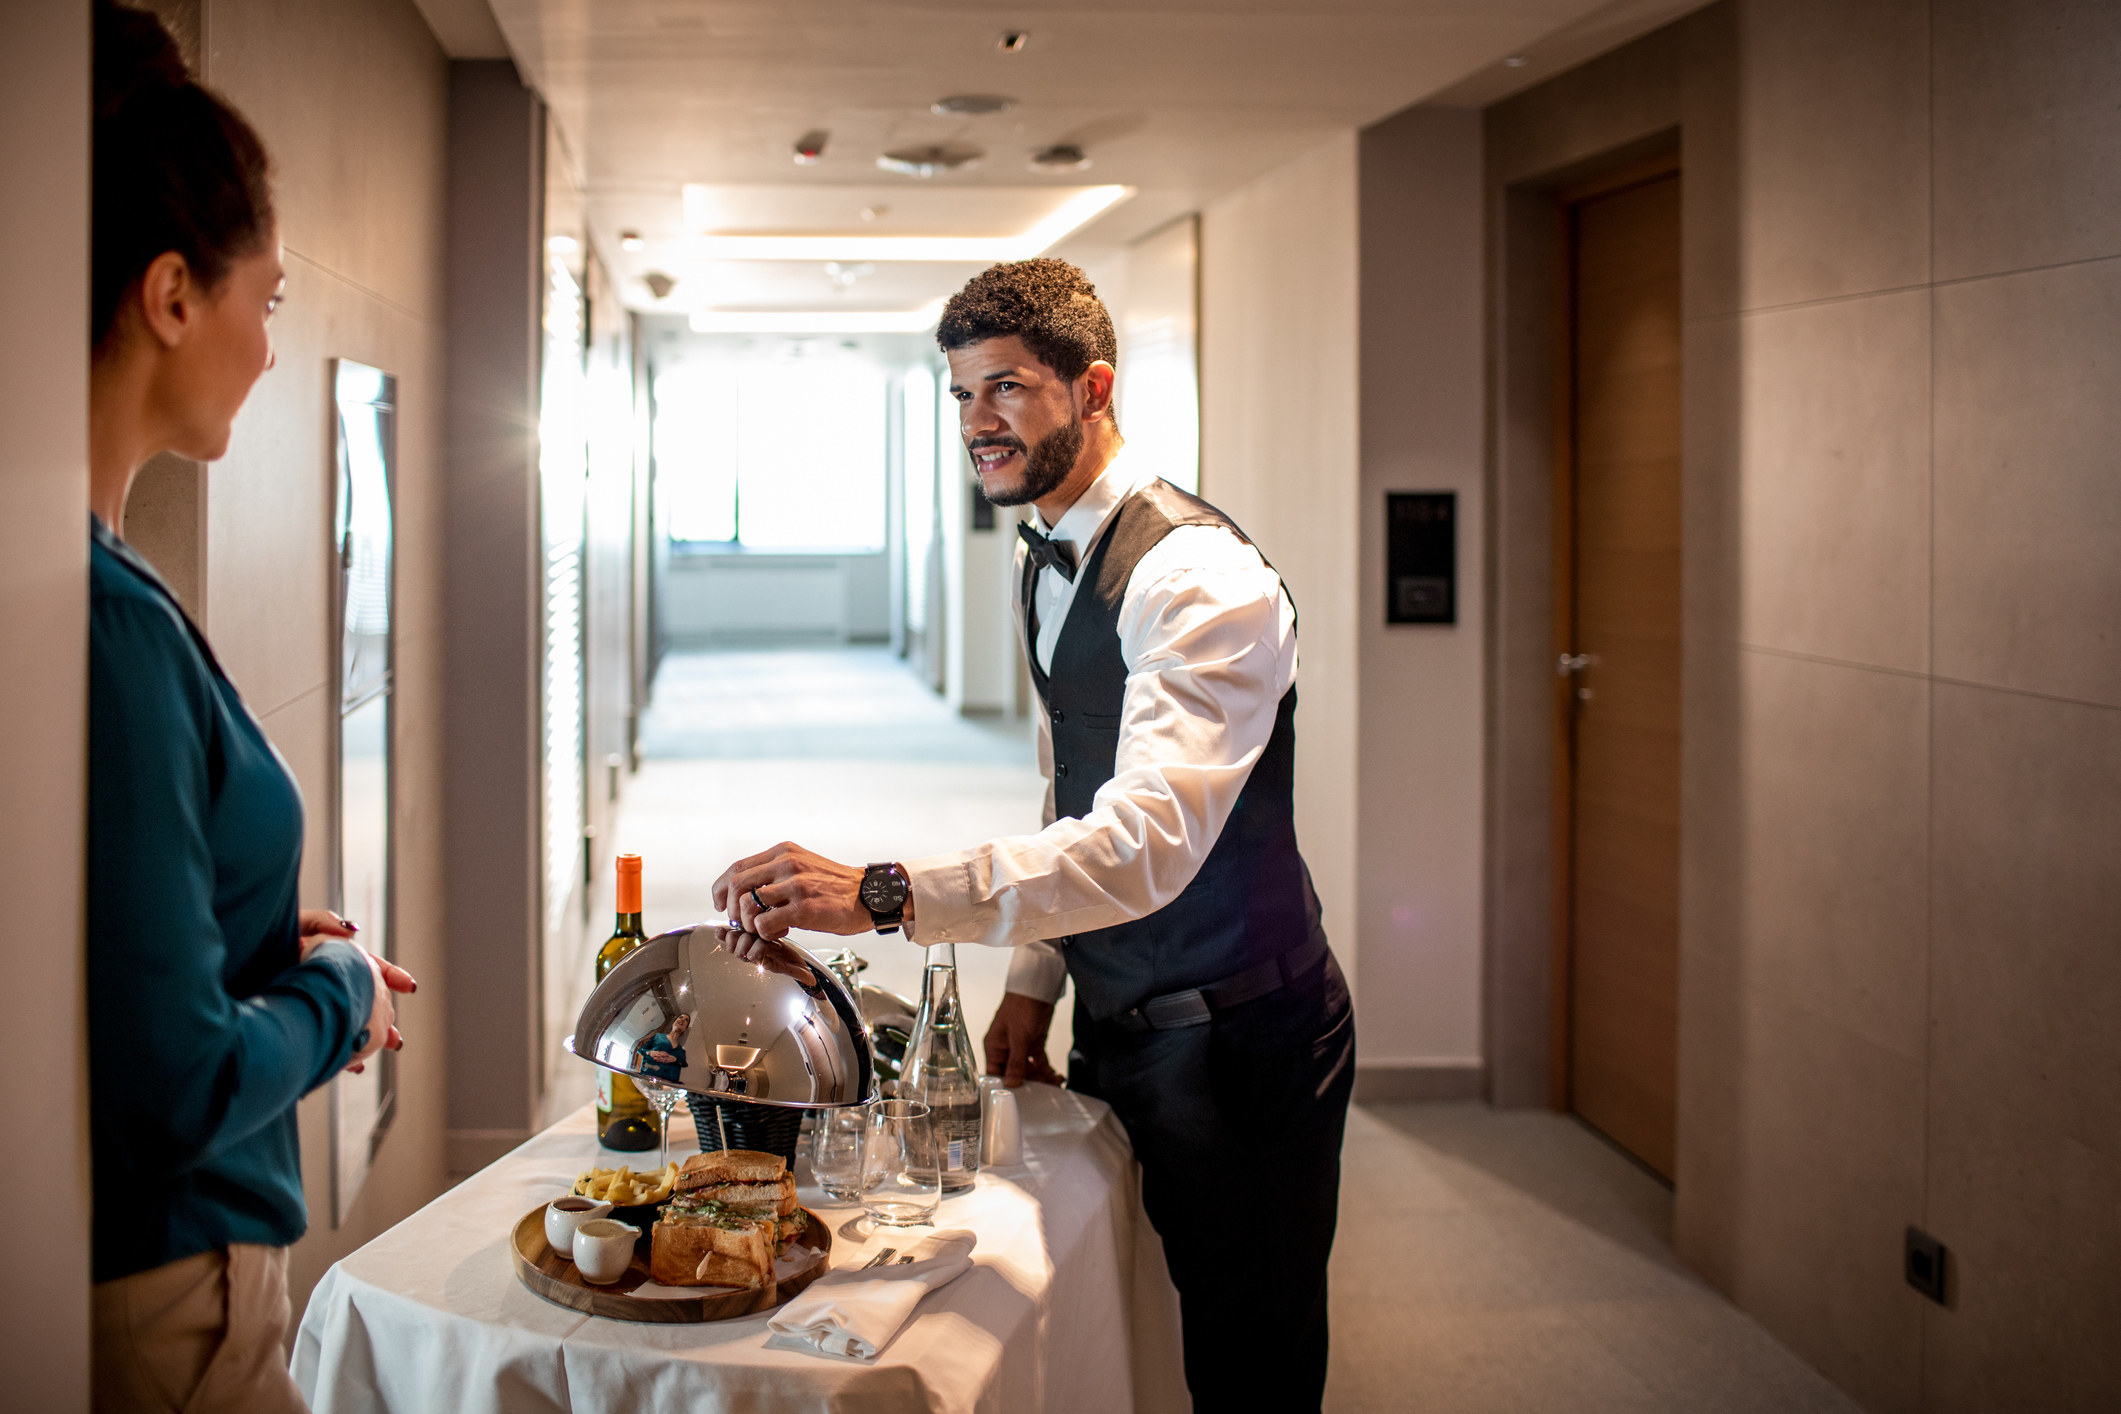 A hotel employee delivering room service